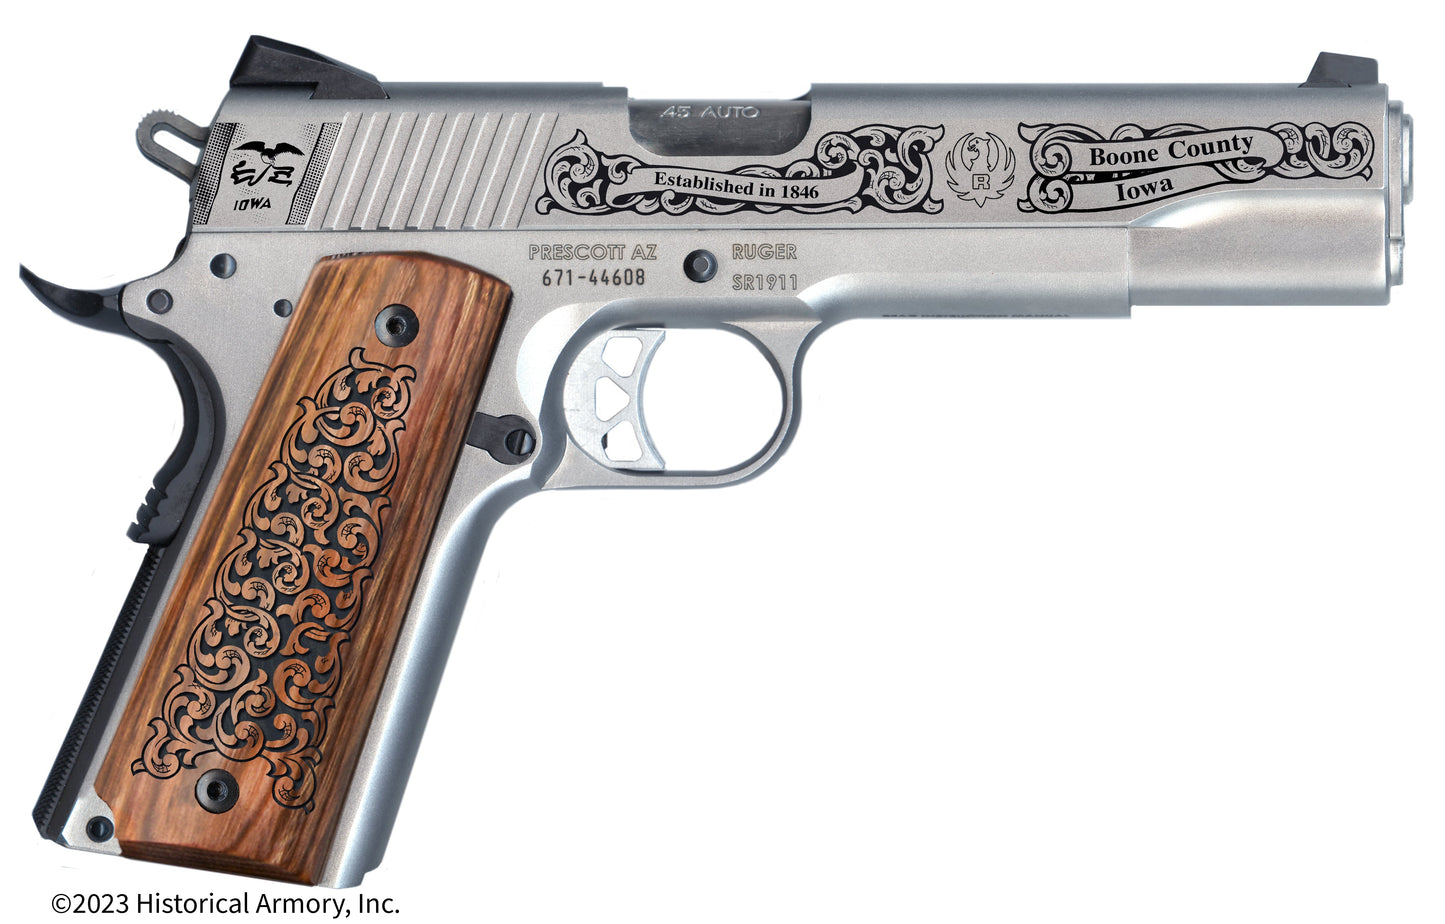 Boone County Iowa Engraved .45 Auto Ruger 1911